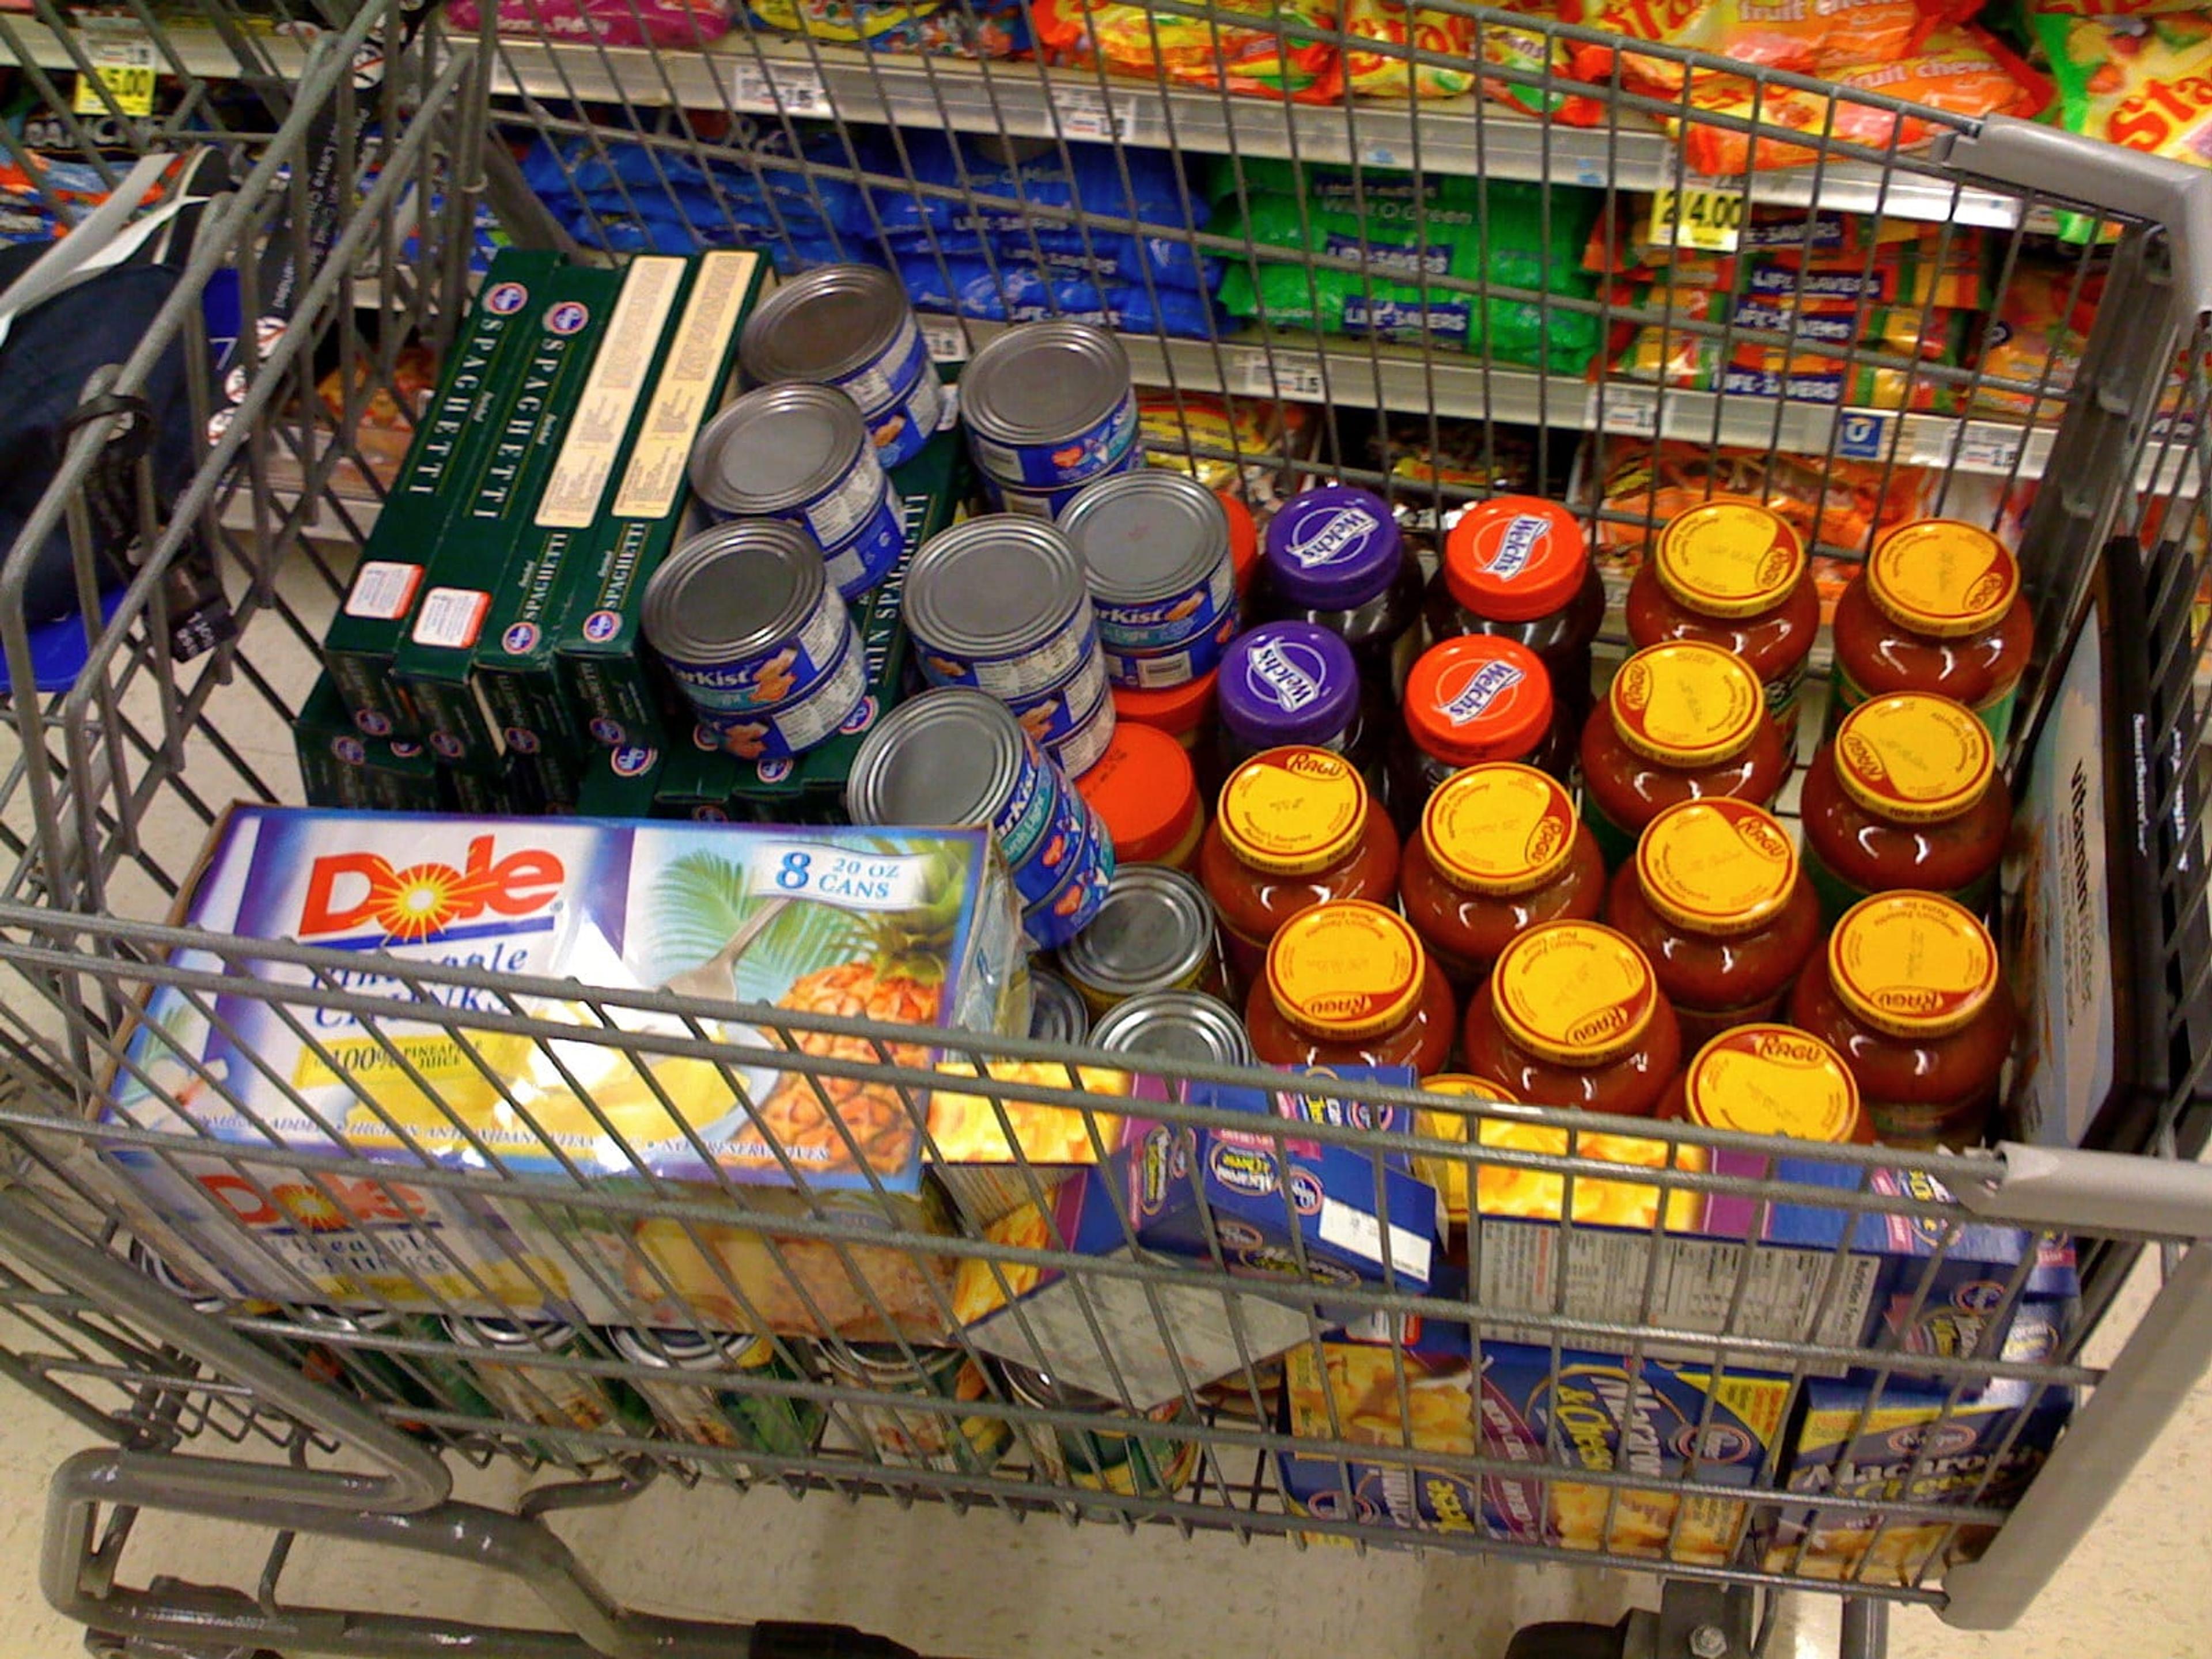 Canned and boxed foods in a grocery cart